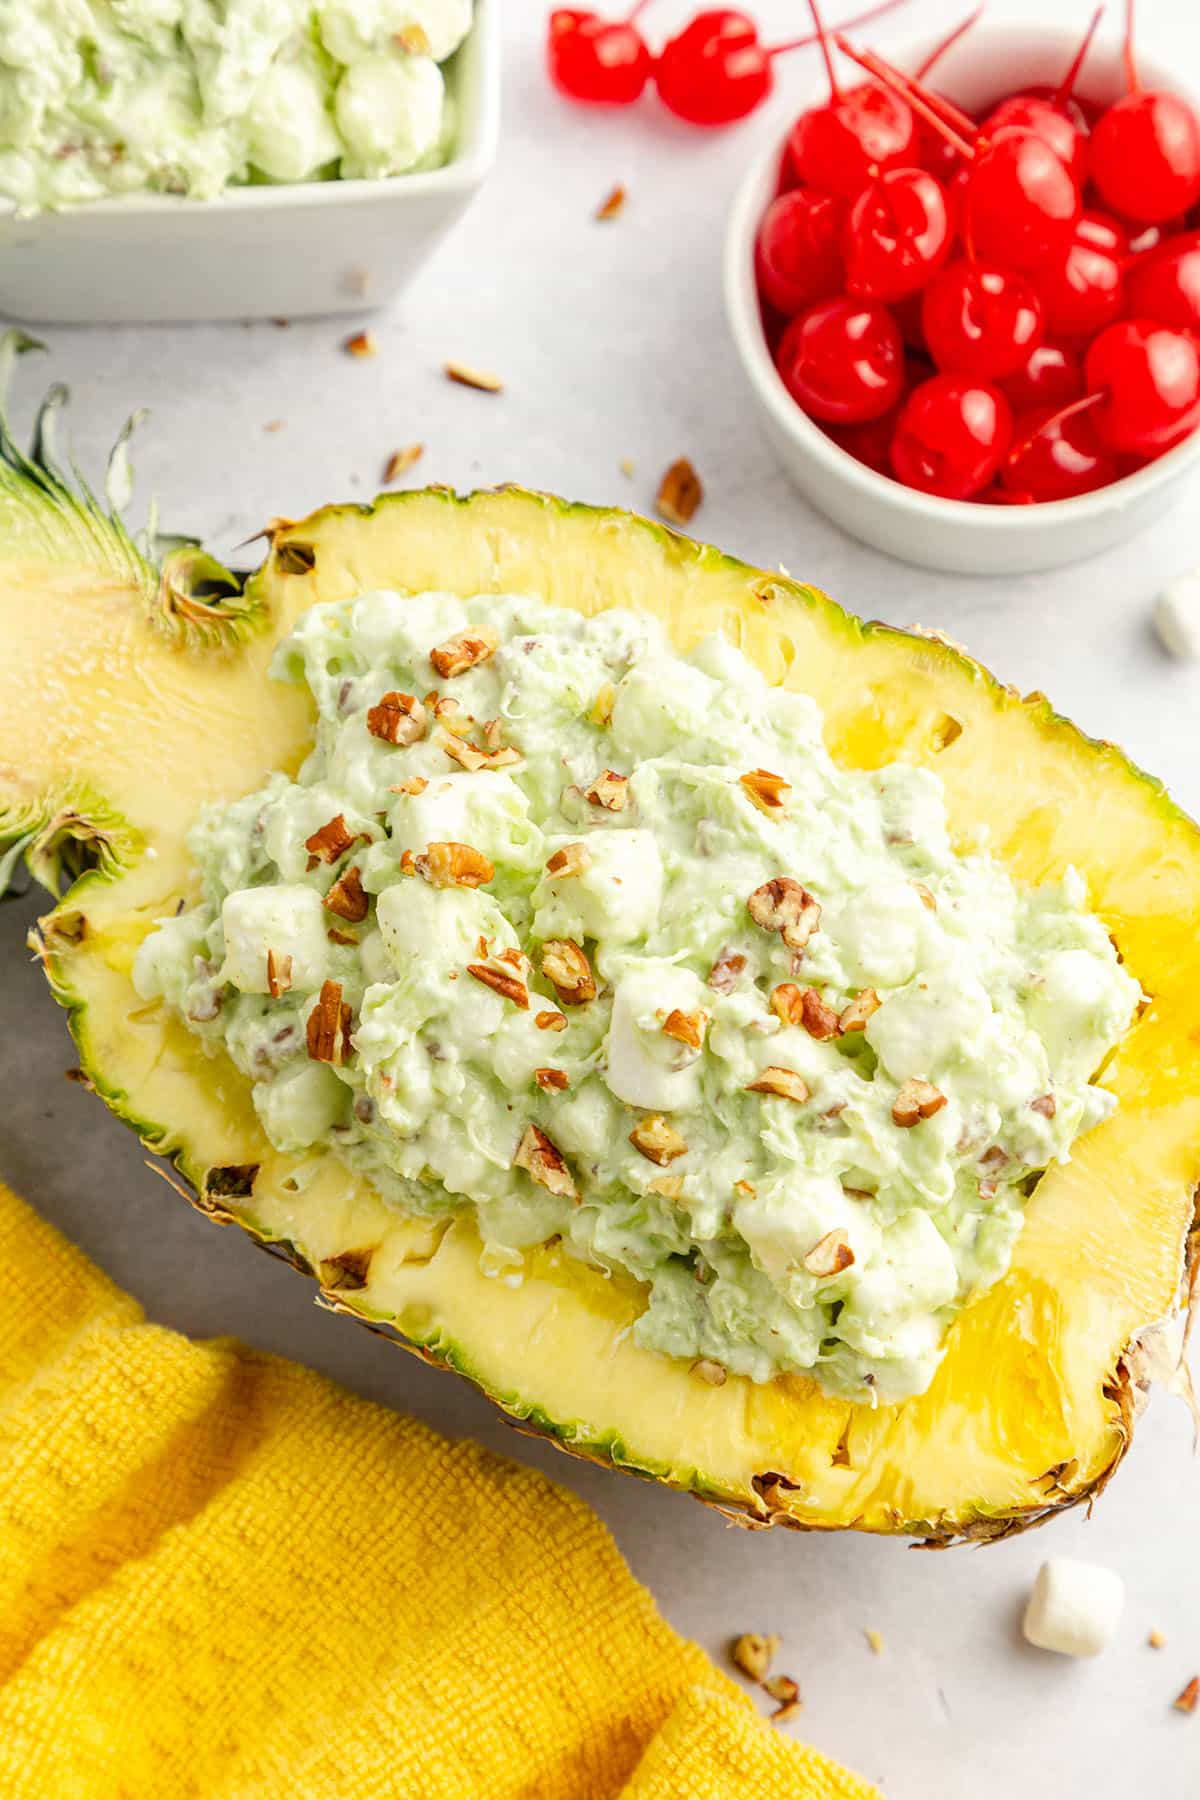 Chopped pecans are sprinkled on top of a half-cut pineapple with Watergate salad